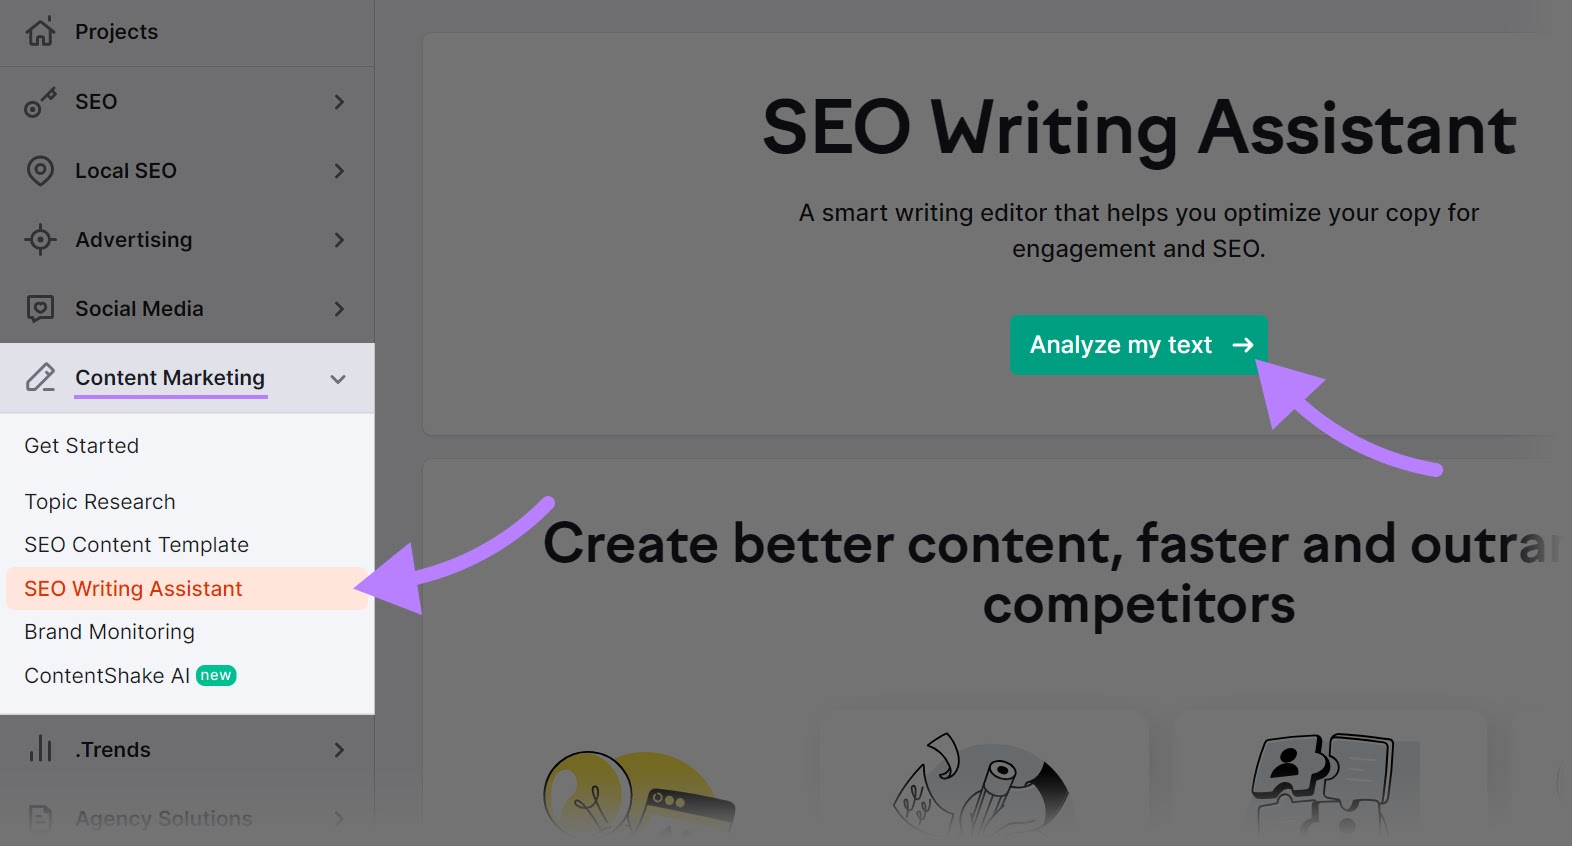 SEO Writing Assistant tool